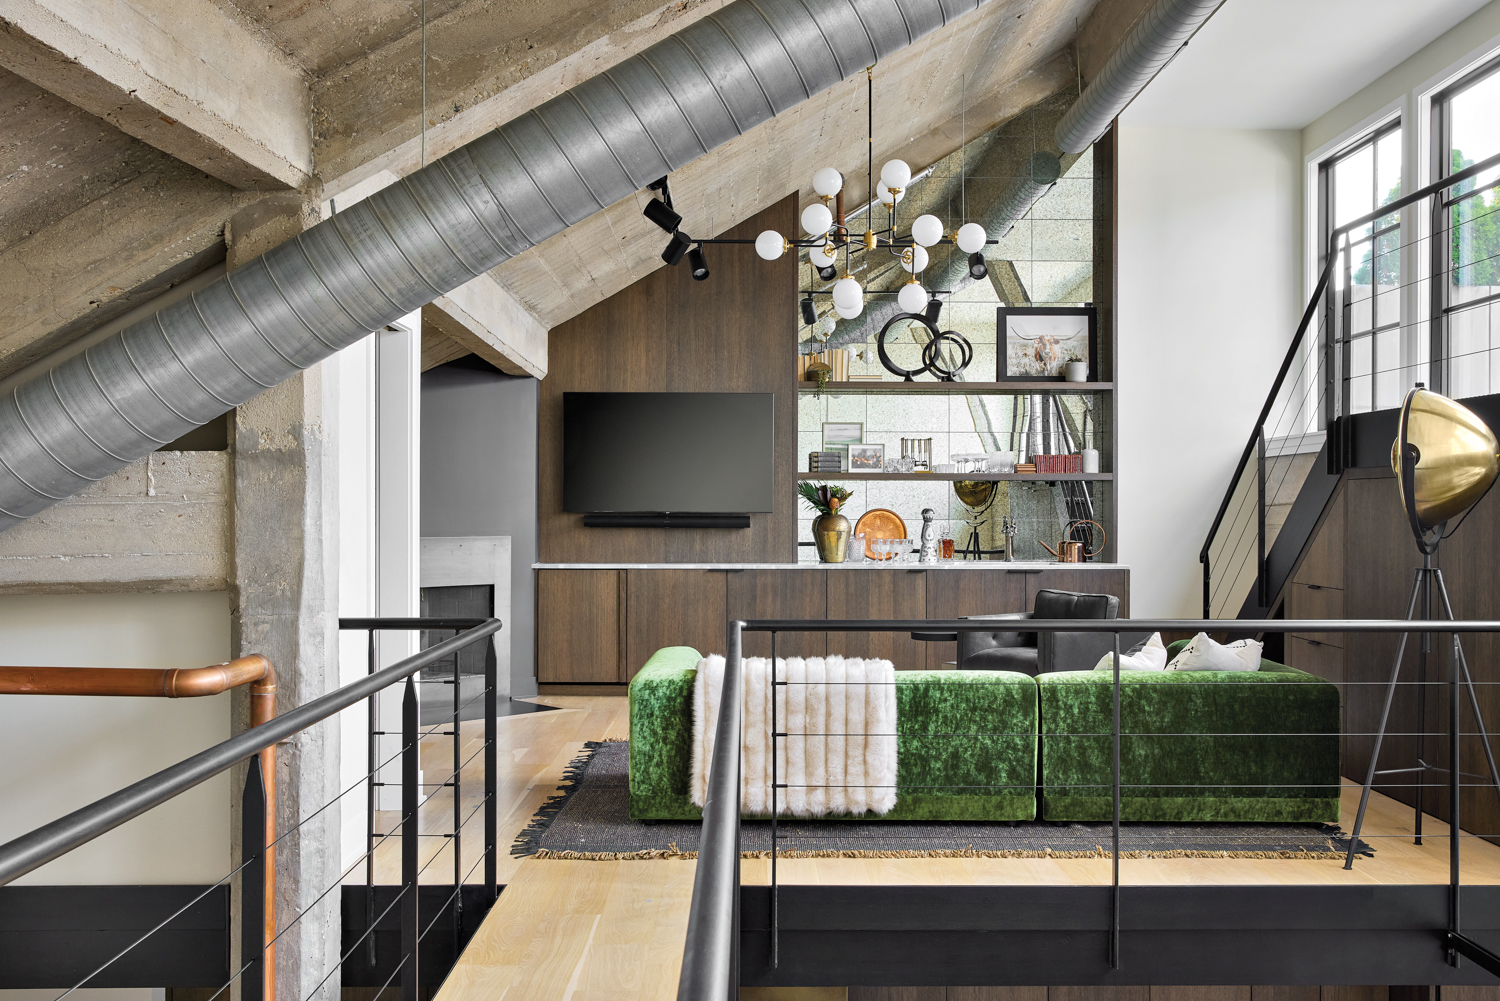 A loft living space with a green velvet sofa and exposed ductwork.